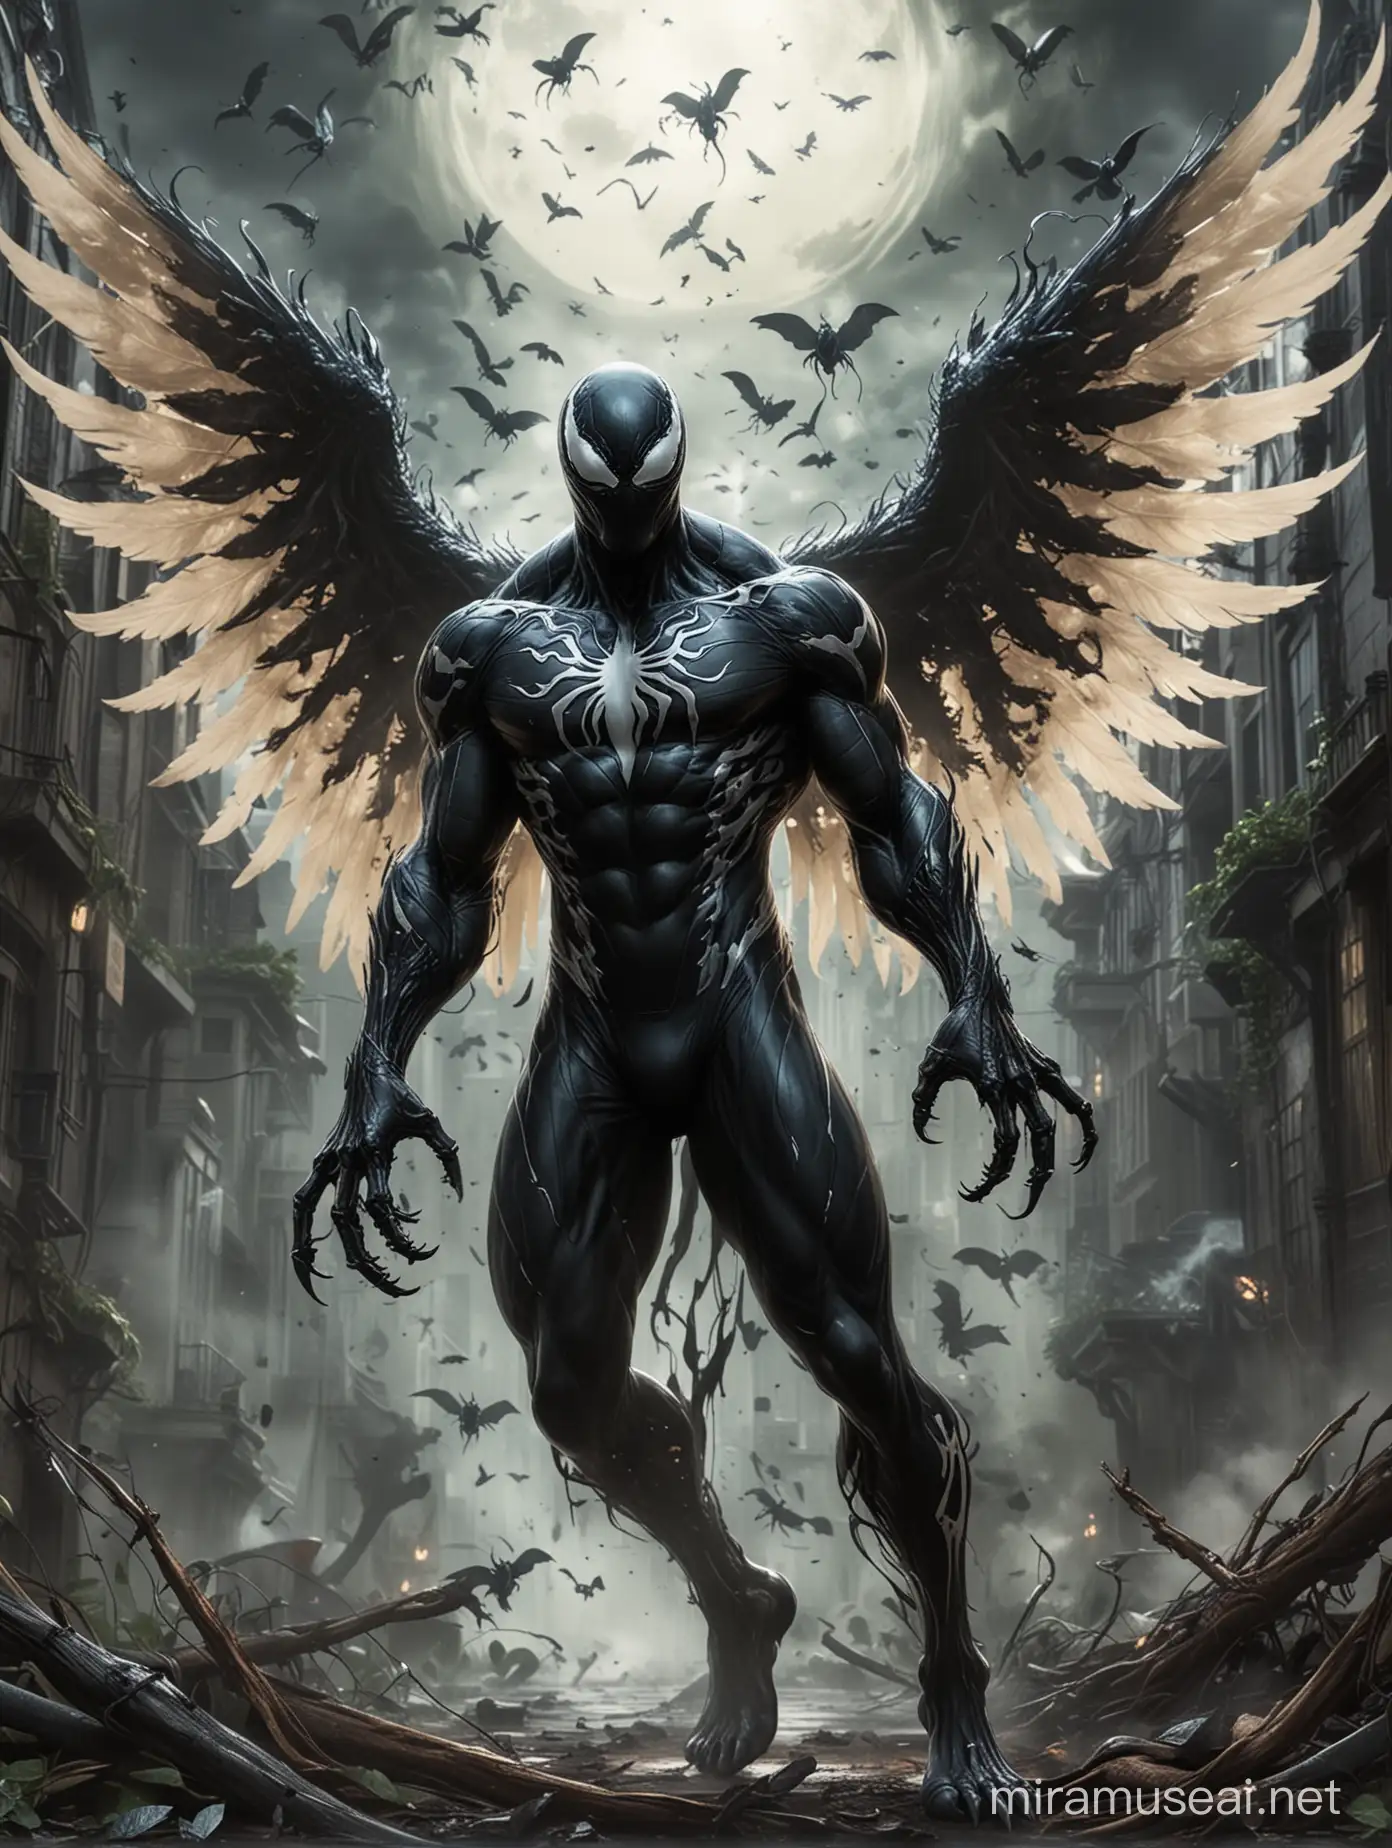 "Midjourney AI here. Venom's aggression with his new wings on his home planet, where the environment appears ominous and his aura permeates the surroundings, suggests a profound internal struggle. Perhaps the transformation triggered deep-seated emotions or conflicts related to his identity or past experiences. Understanding and addressing these underlying issues are crucial for Venom's well-being and the stability of his planet."